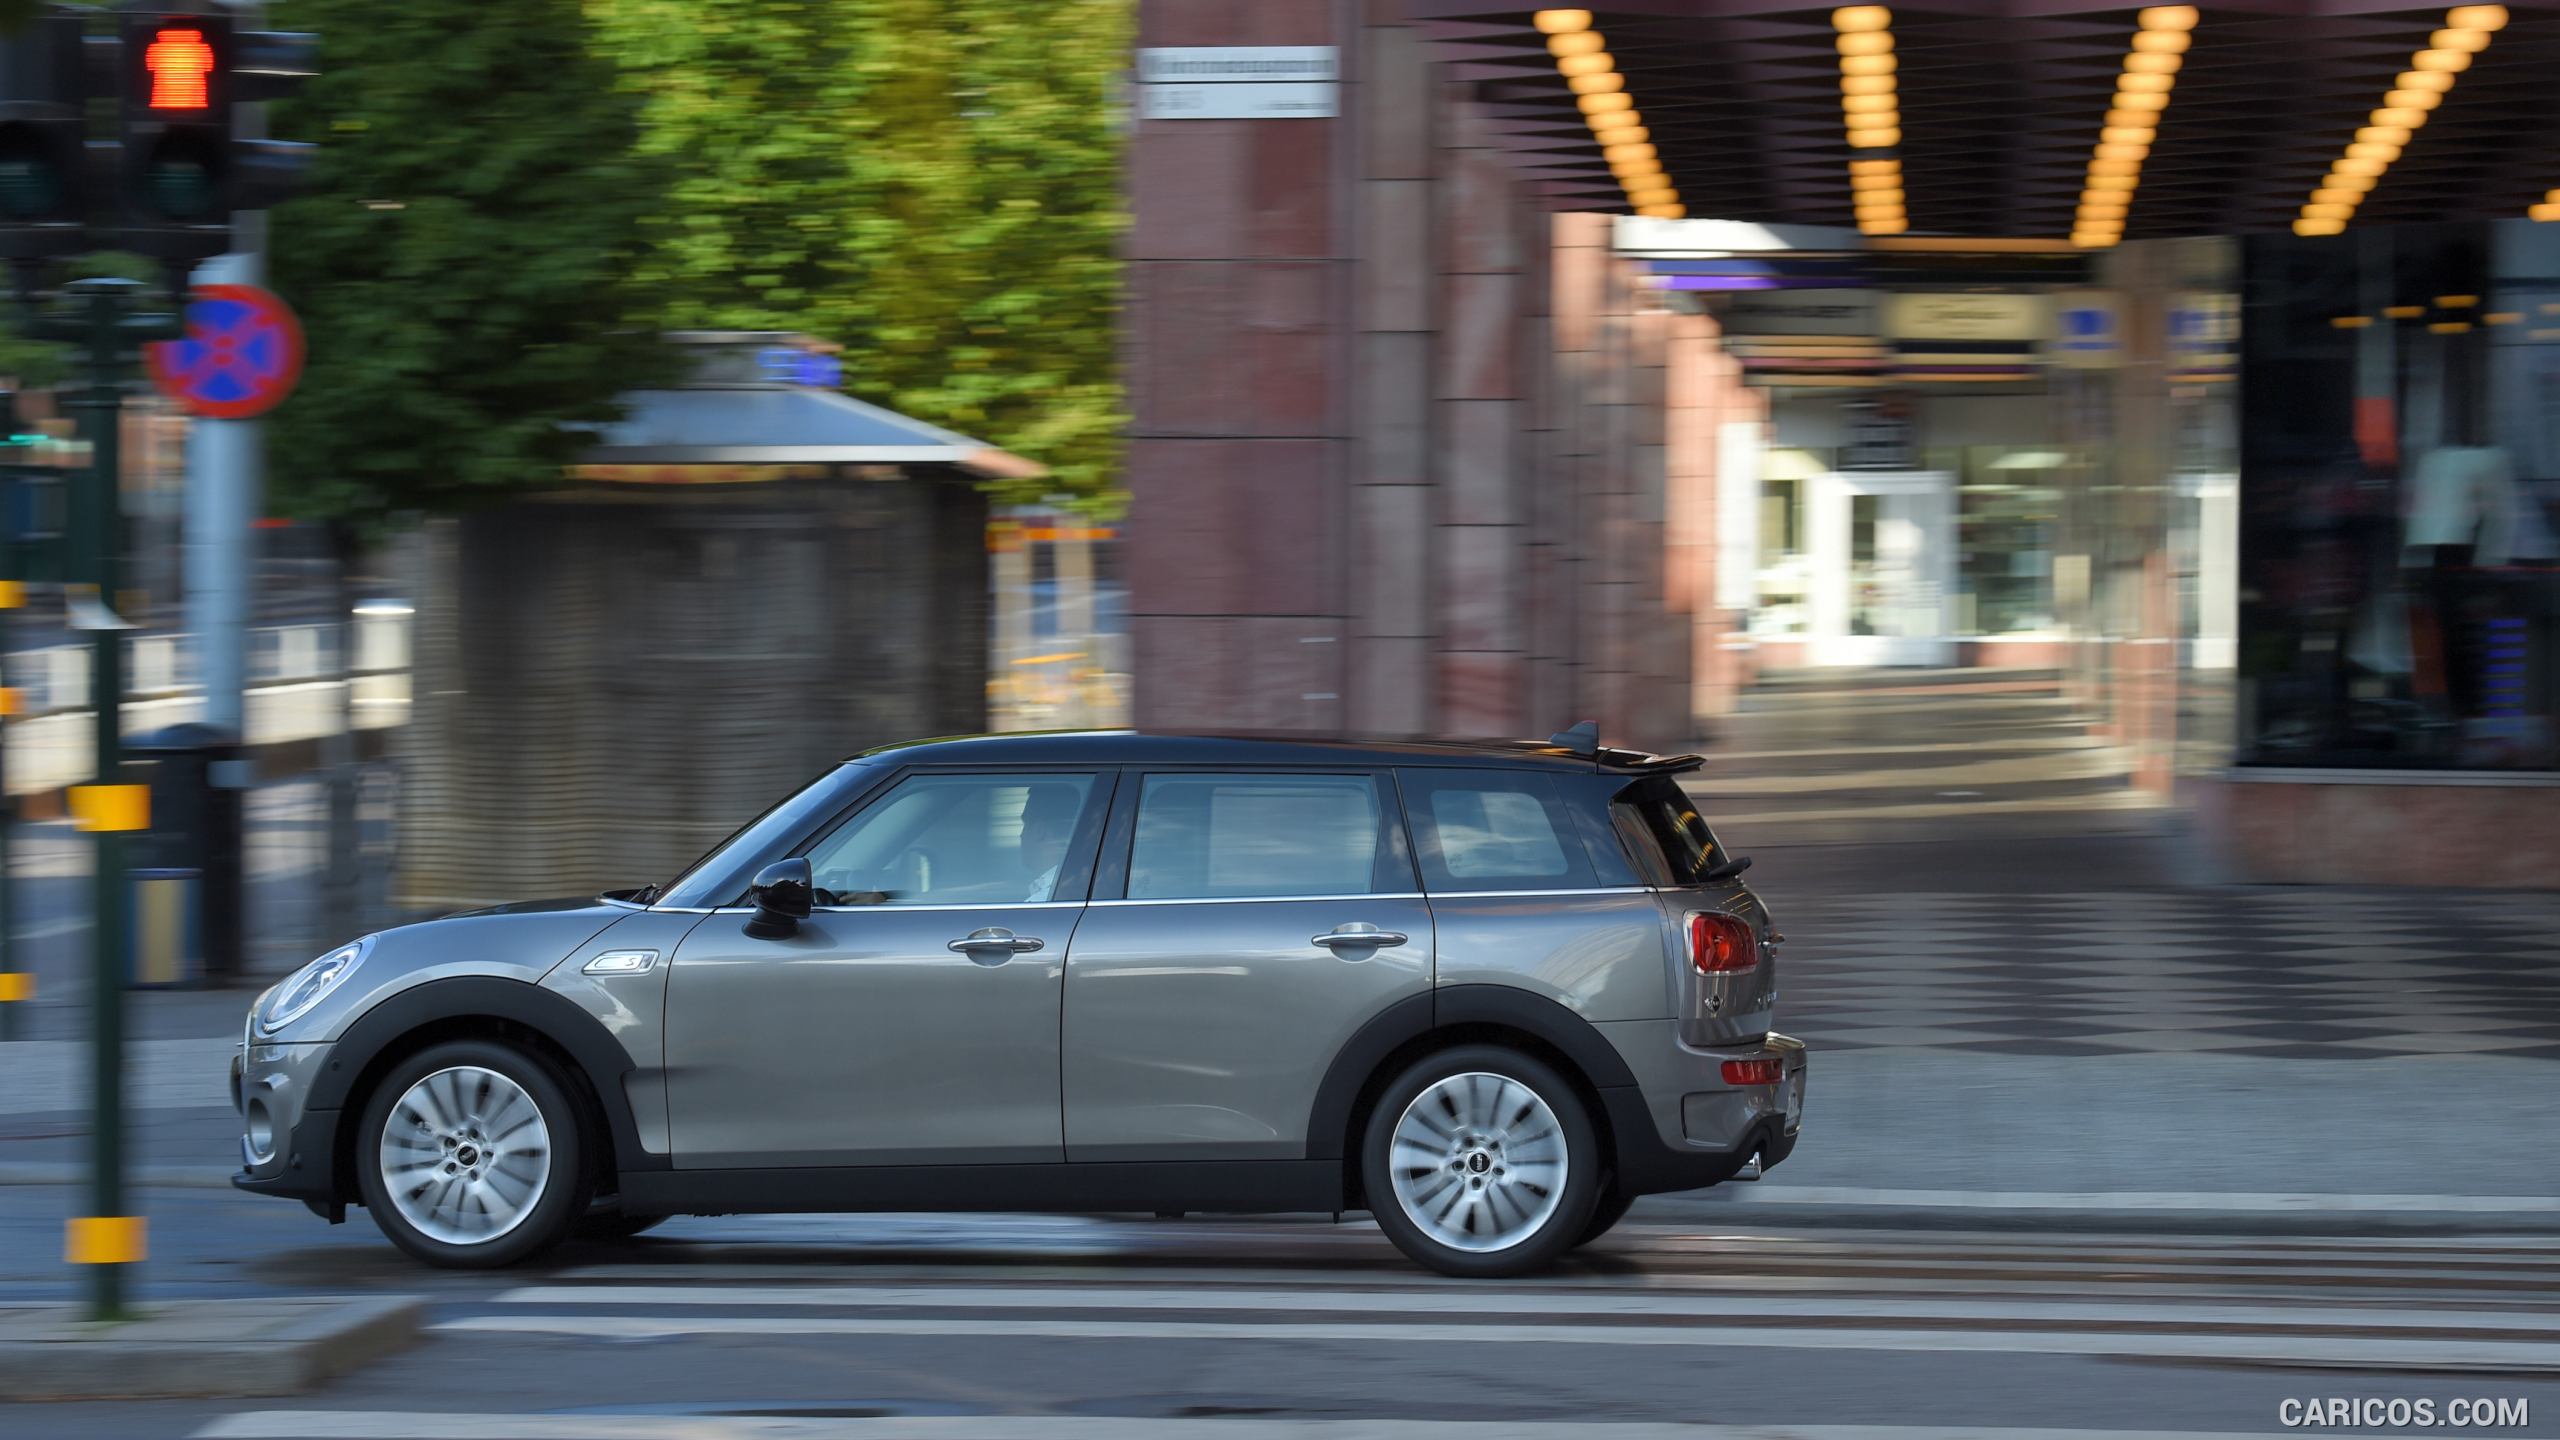 2016 MINI Cooper S Clubman in Metallic Melting Silver - Side, #170 of 380